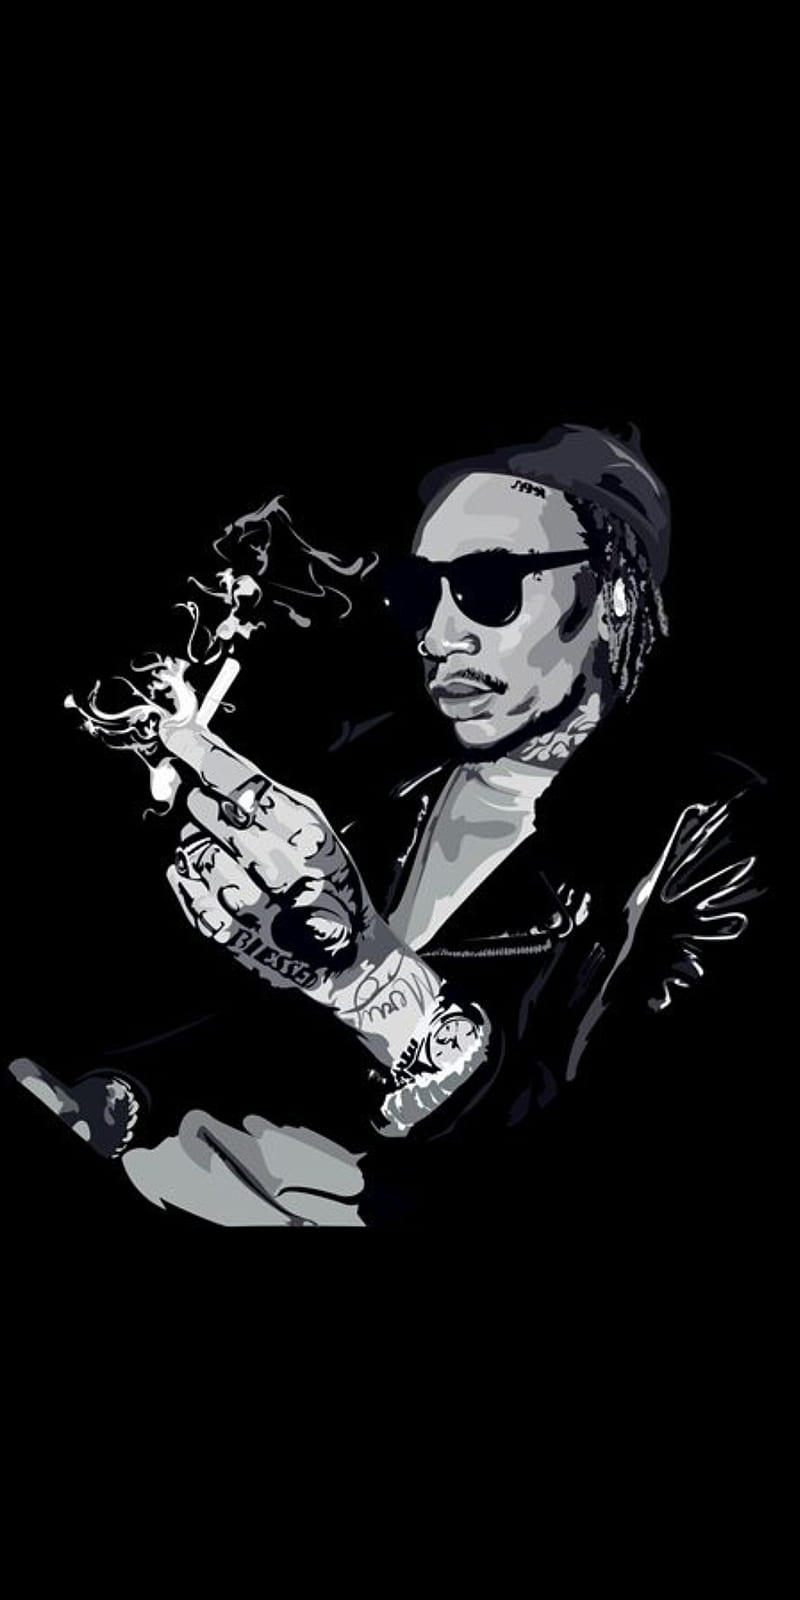 Android Wiz Khalifa Wallpapers - KoLPaPer - Awesome Free HD Wallpapers